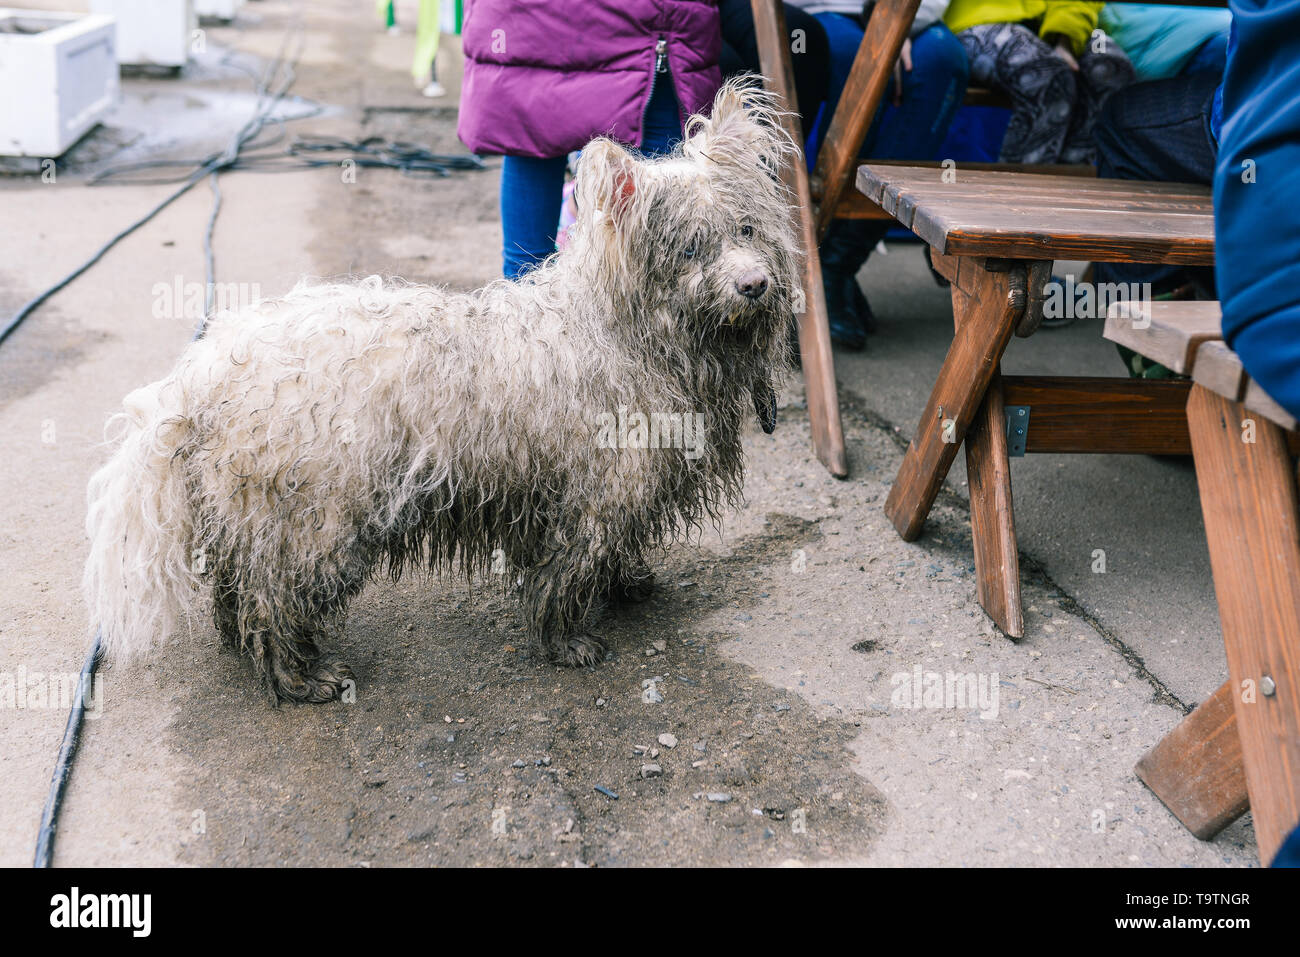 An abandoned or lost dog asks for food from people. Unhappy stray dog. Wet, dirty white dog on the street. Starving animal Stock Photo